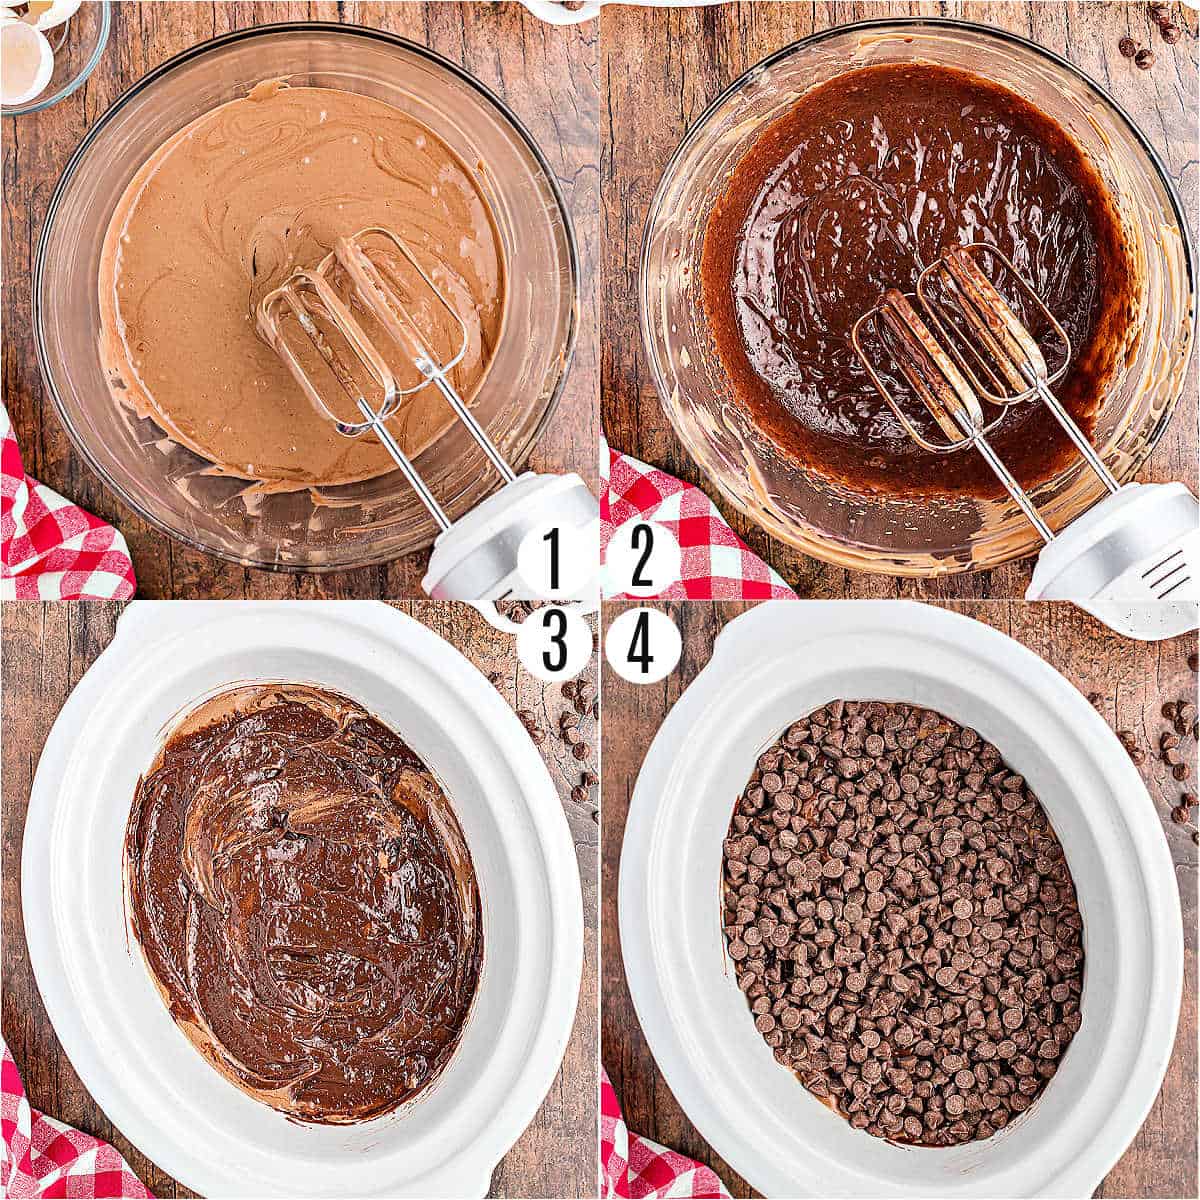 Step by step photos showing how to make chocolate pudding cake.